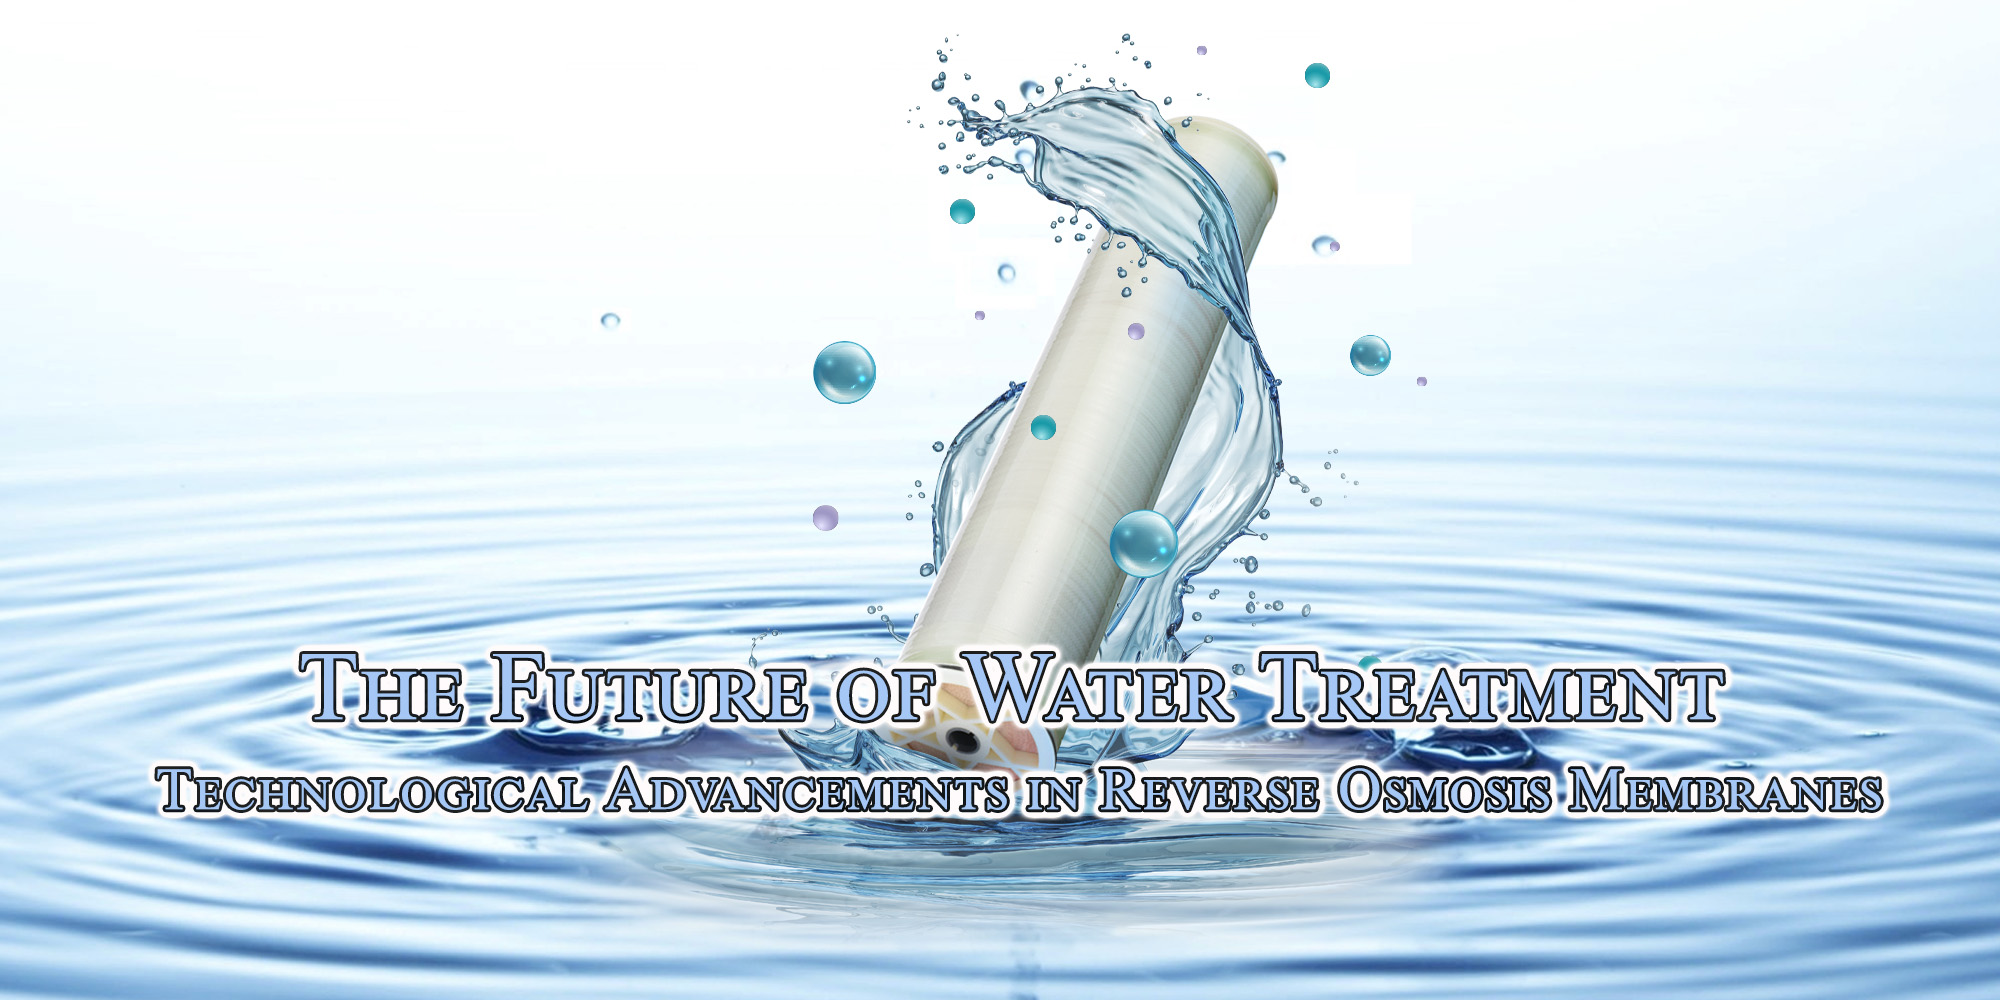 Technological Advancements in Reverse Osmosis Membranes